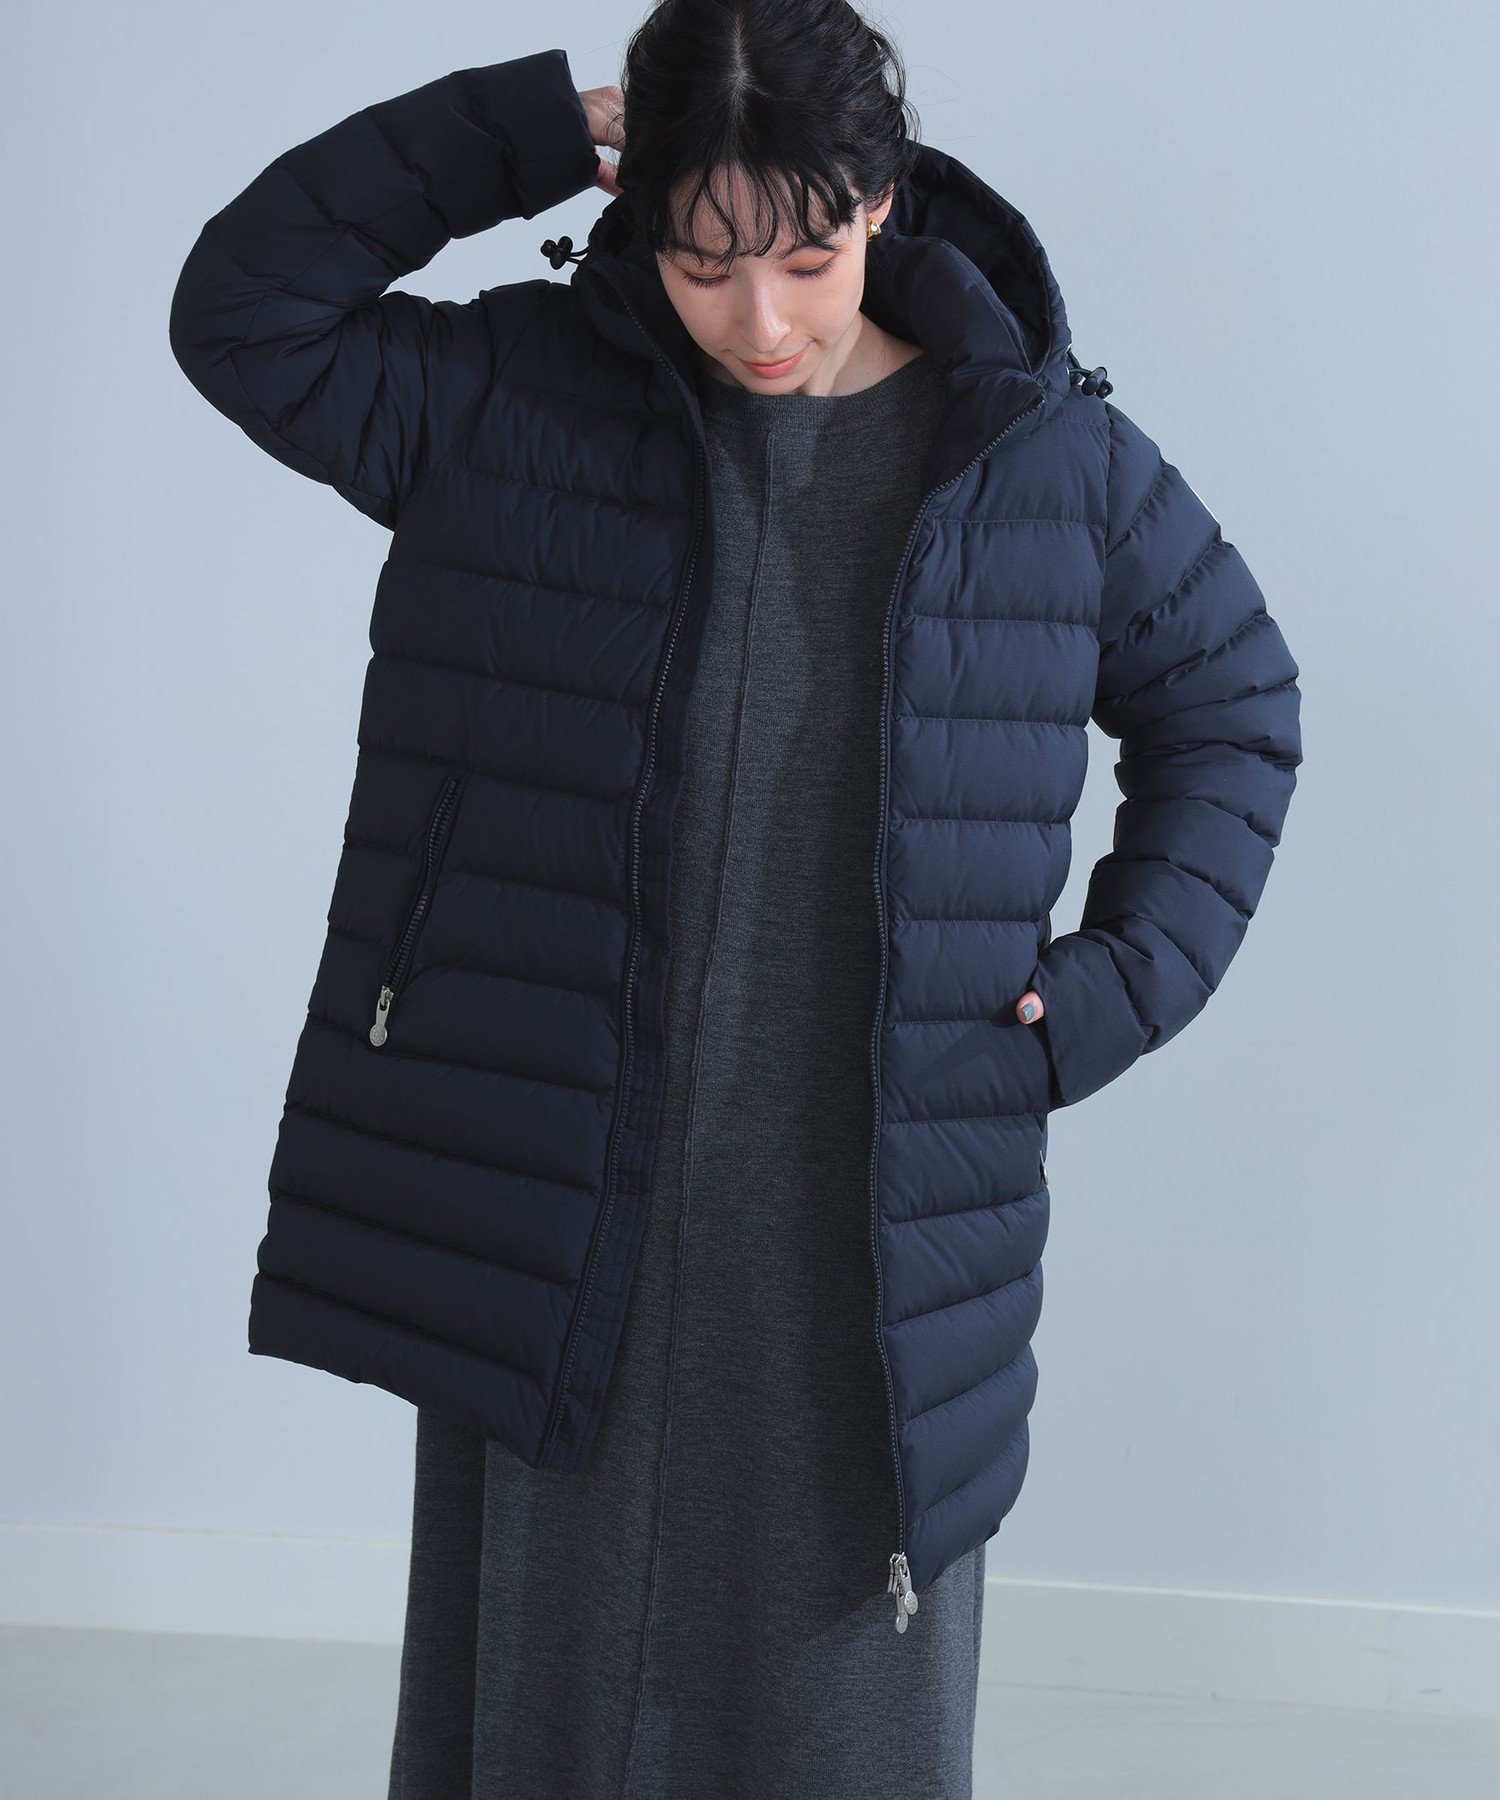 Demi-Luxe BEAMS｜PYRENEX / SPOUTNIC SOFT2 ロングダウン コート 23AW